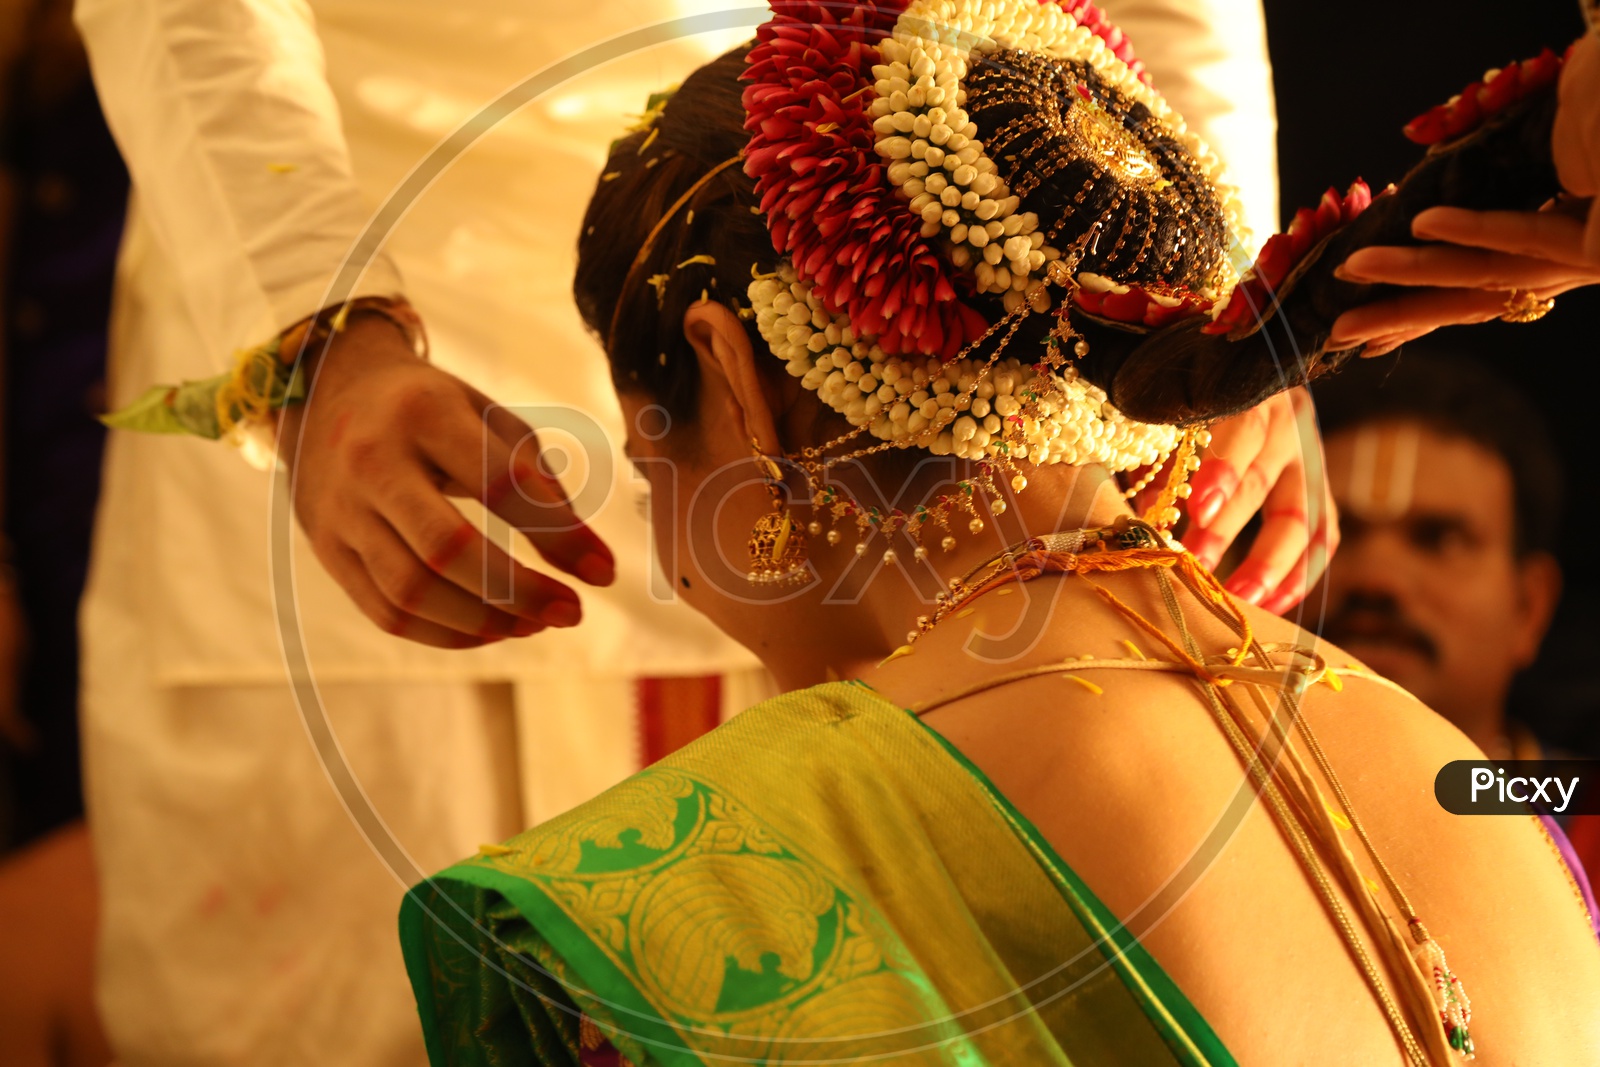 South Indian Bridal Hairstyles: Diva Divine Weave Hair Extensions by  Especially Yours - Issuu